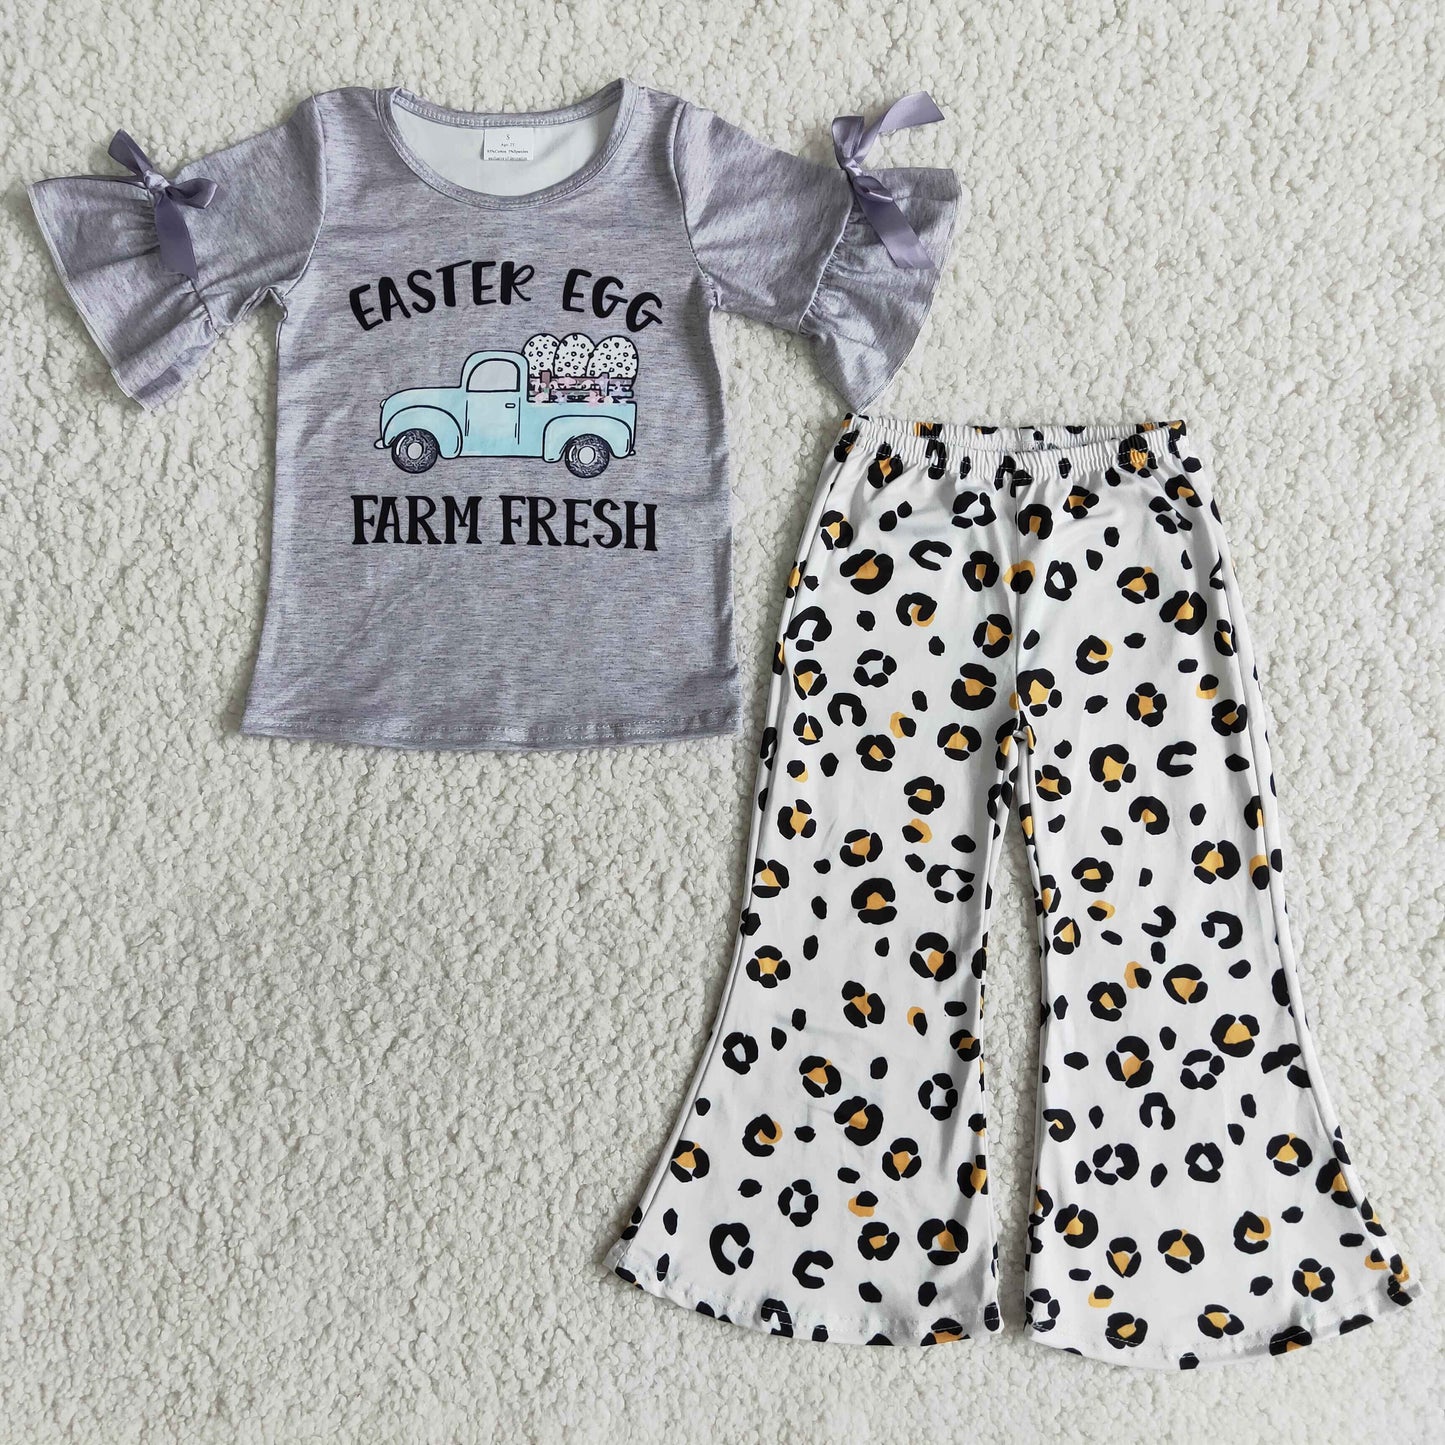 Easter egg top leopard pants outfits